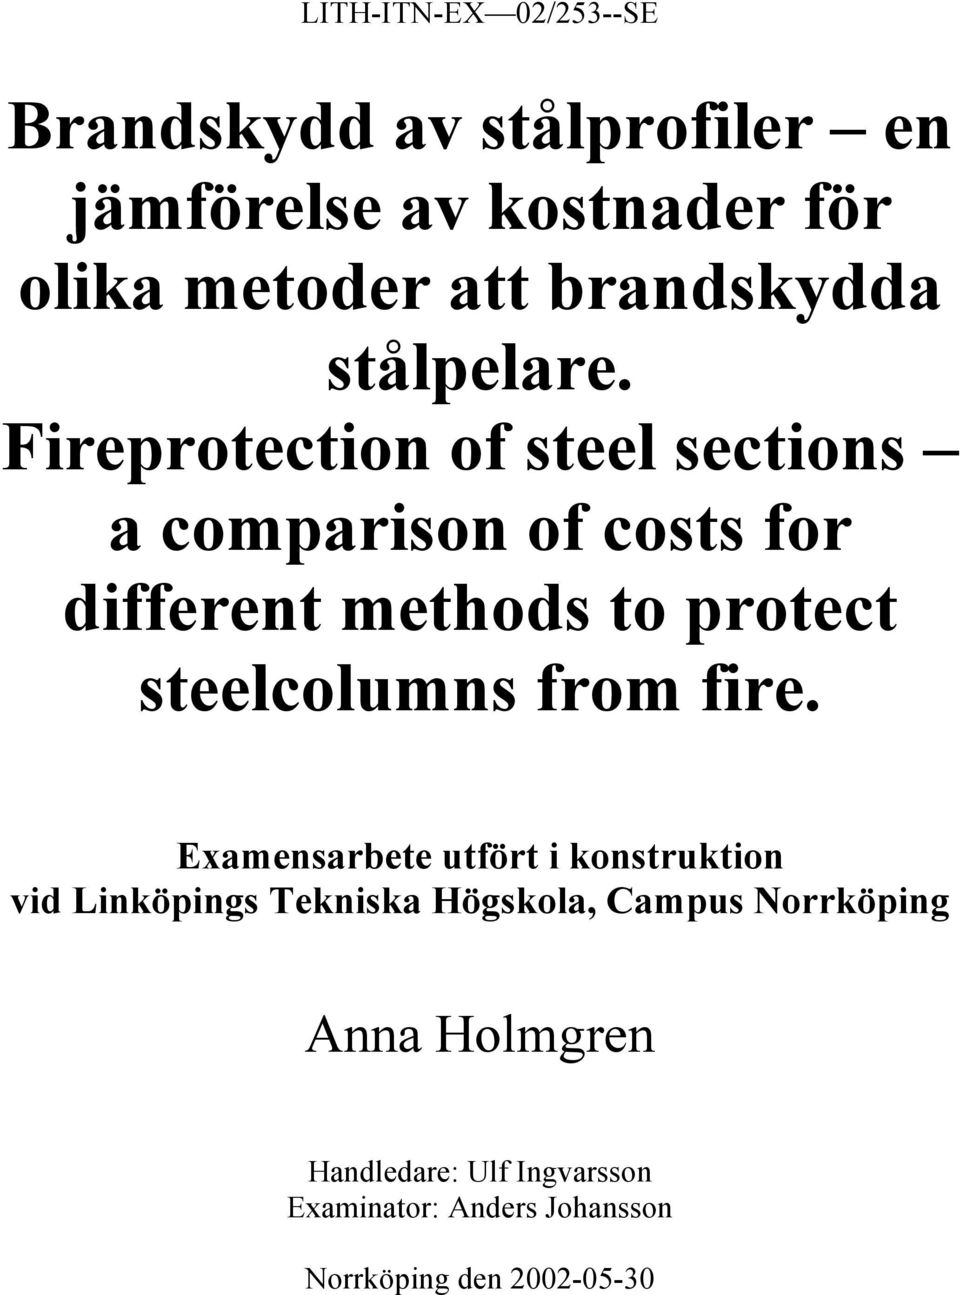 Fireprotection of steel sections a comparison of costs for different methods to protect steelcolumns